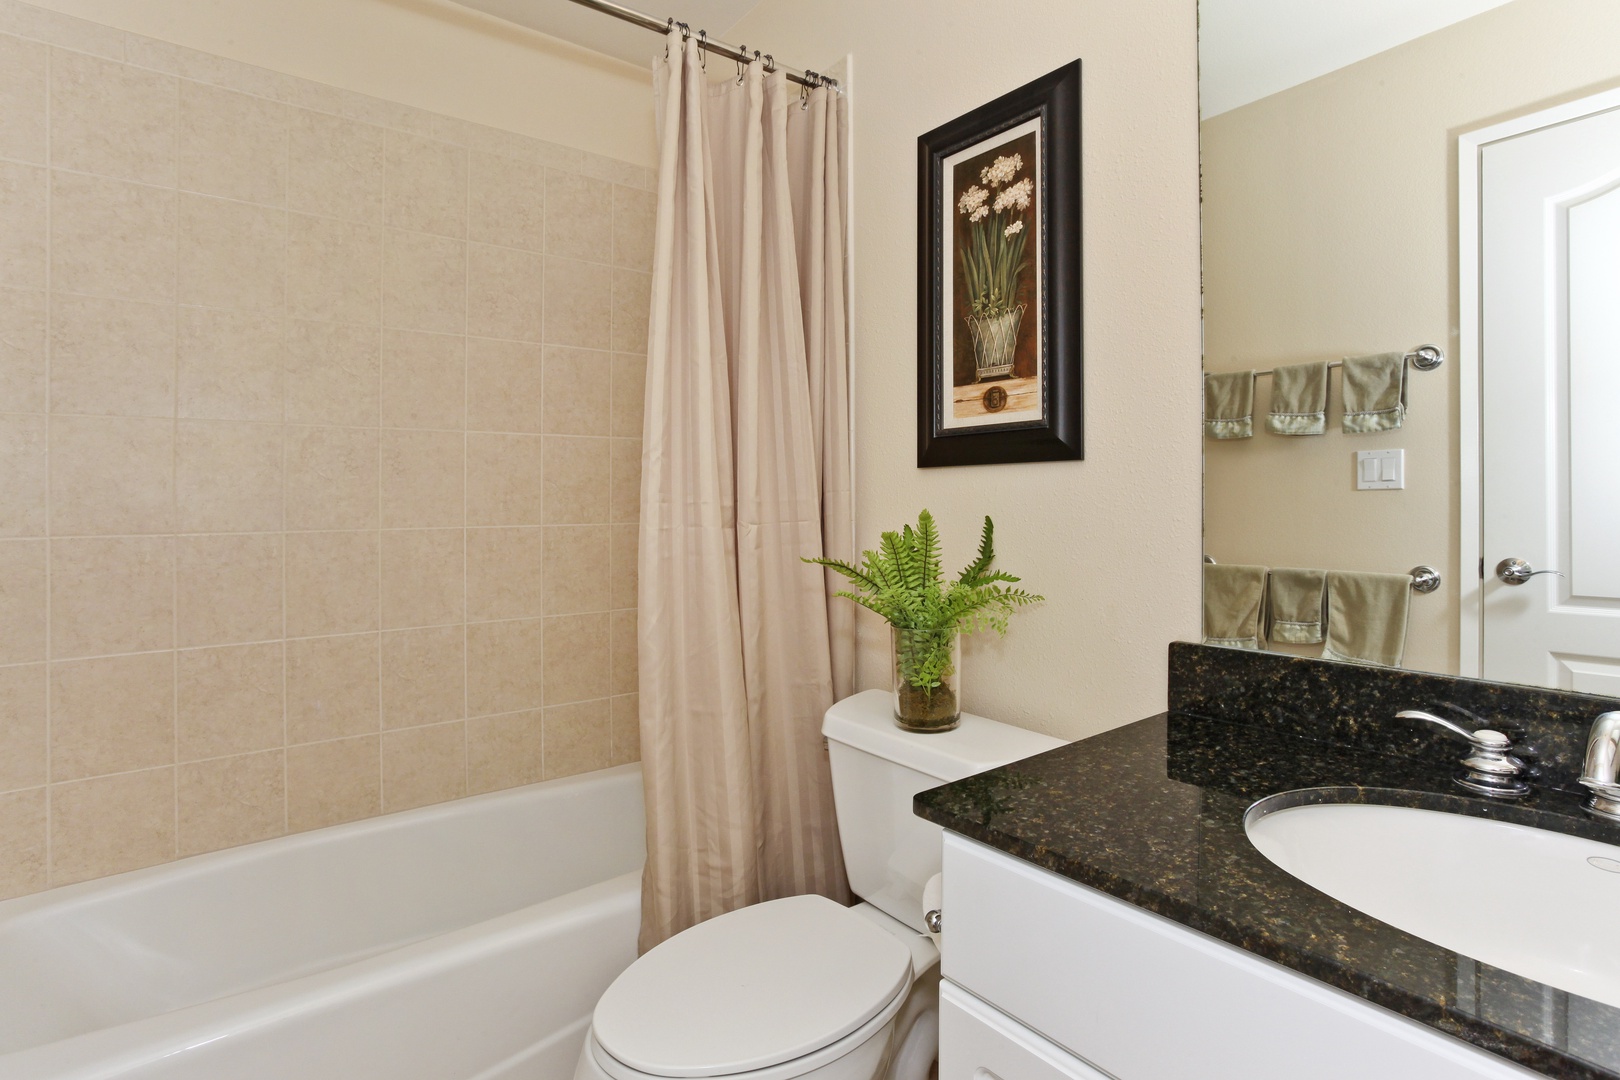 Kapolei Vacation Rentals, Ko Olina Kai Estate #20 - The third guest bathroom with a shower and tub combo.